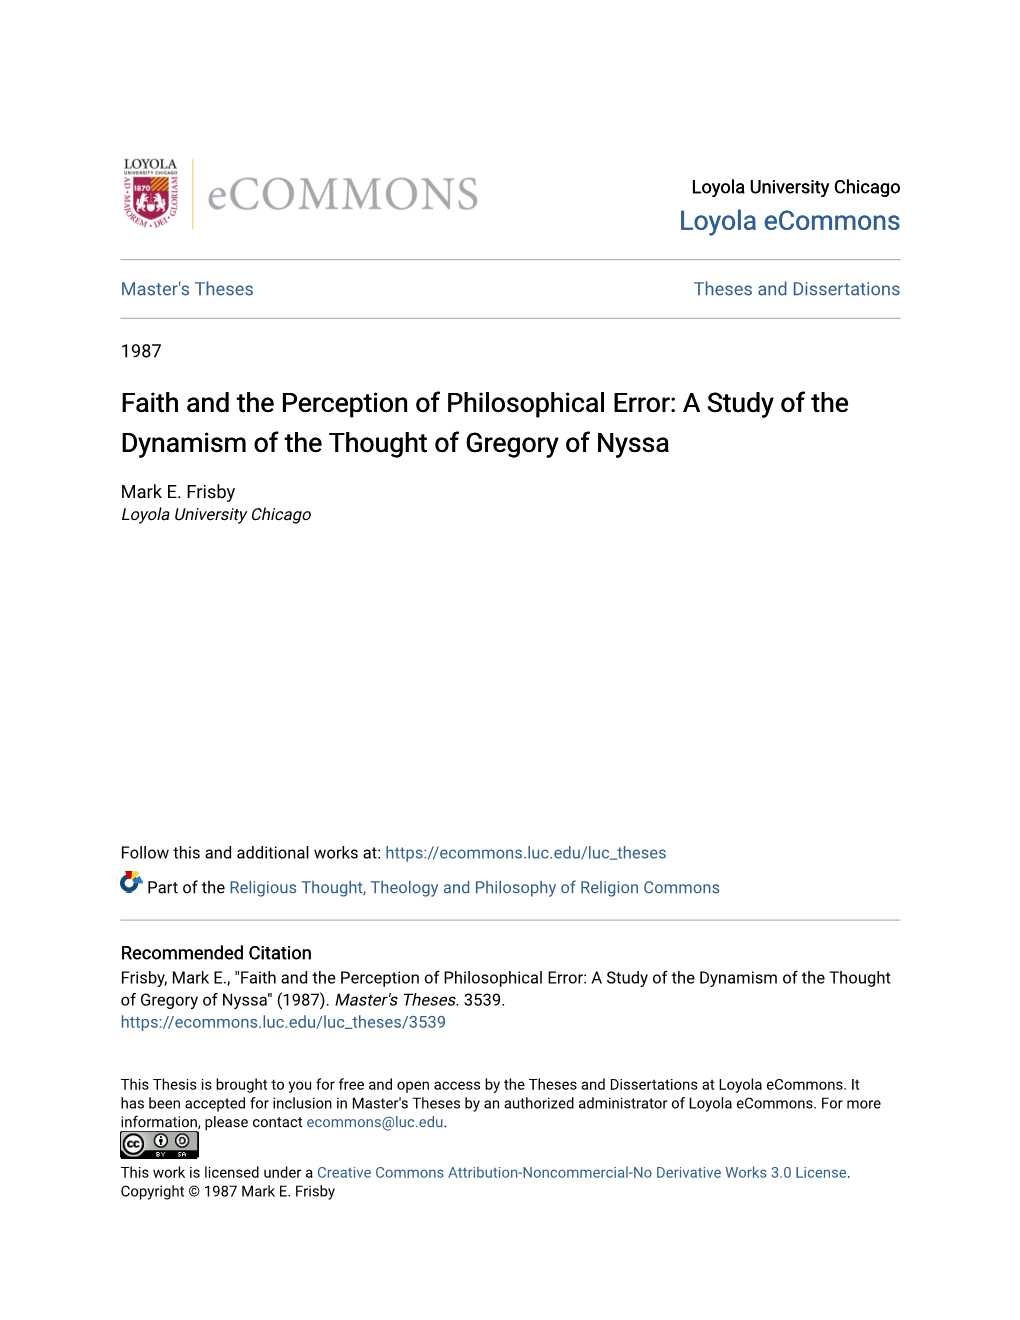 Faith and the Perception of Philosophical Error: a Study of the Dynamism of the Thought of Gregory of Nyssa